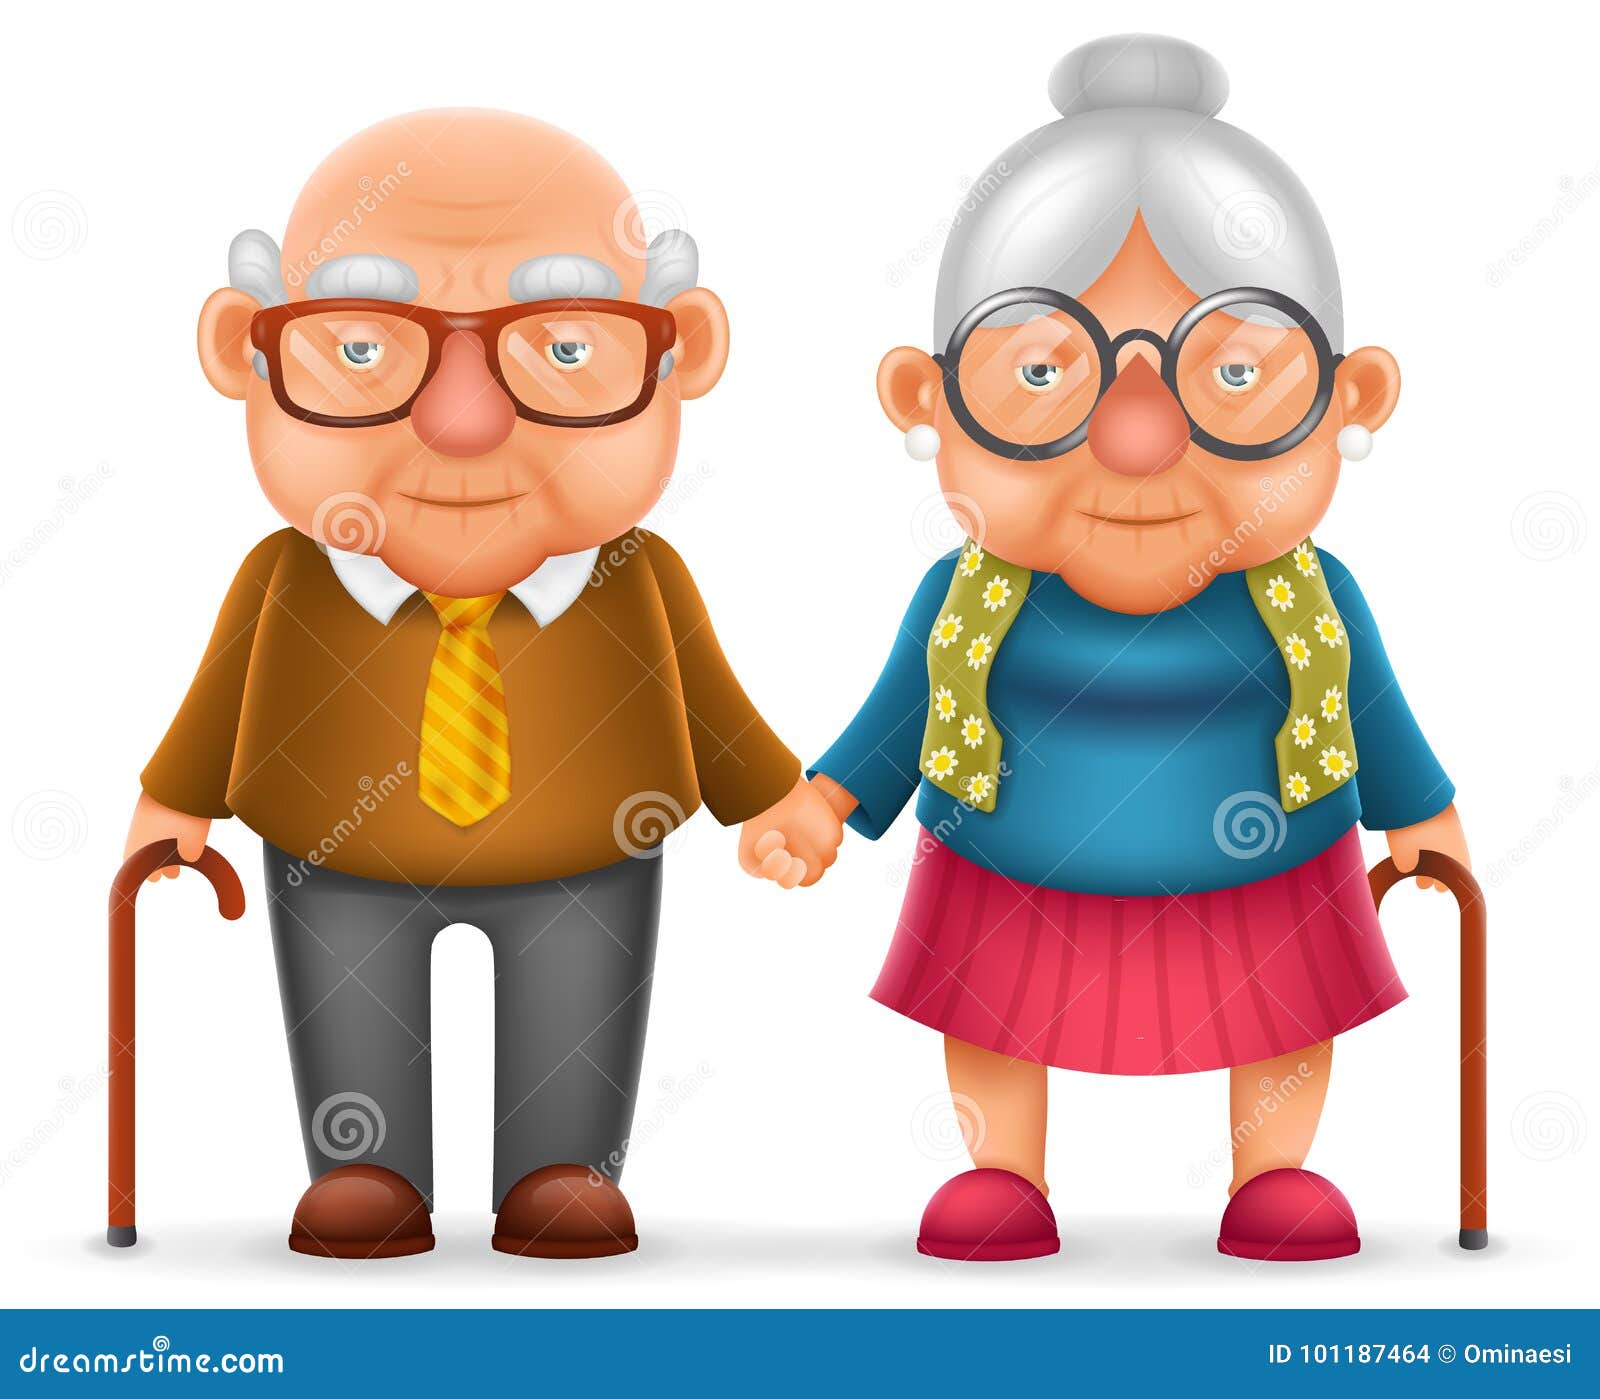 Cute Smile Happy Elderly Couple Old Man Love Woman Grandfather Grandmother  3d Realistic Cartoon Family Character Design Stock Vector - Illustration of  married, granny: 101187464